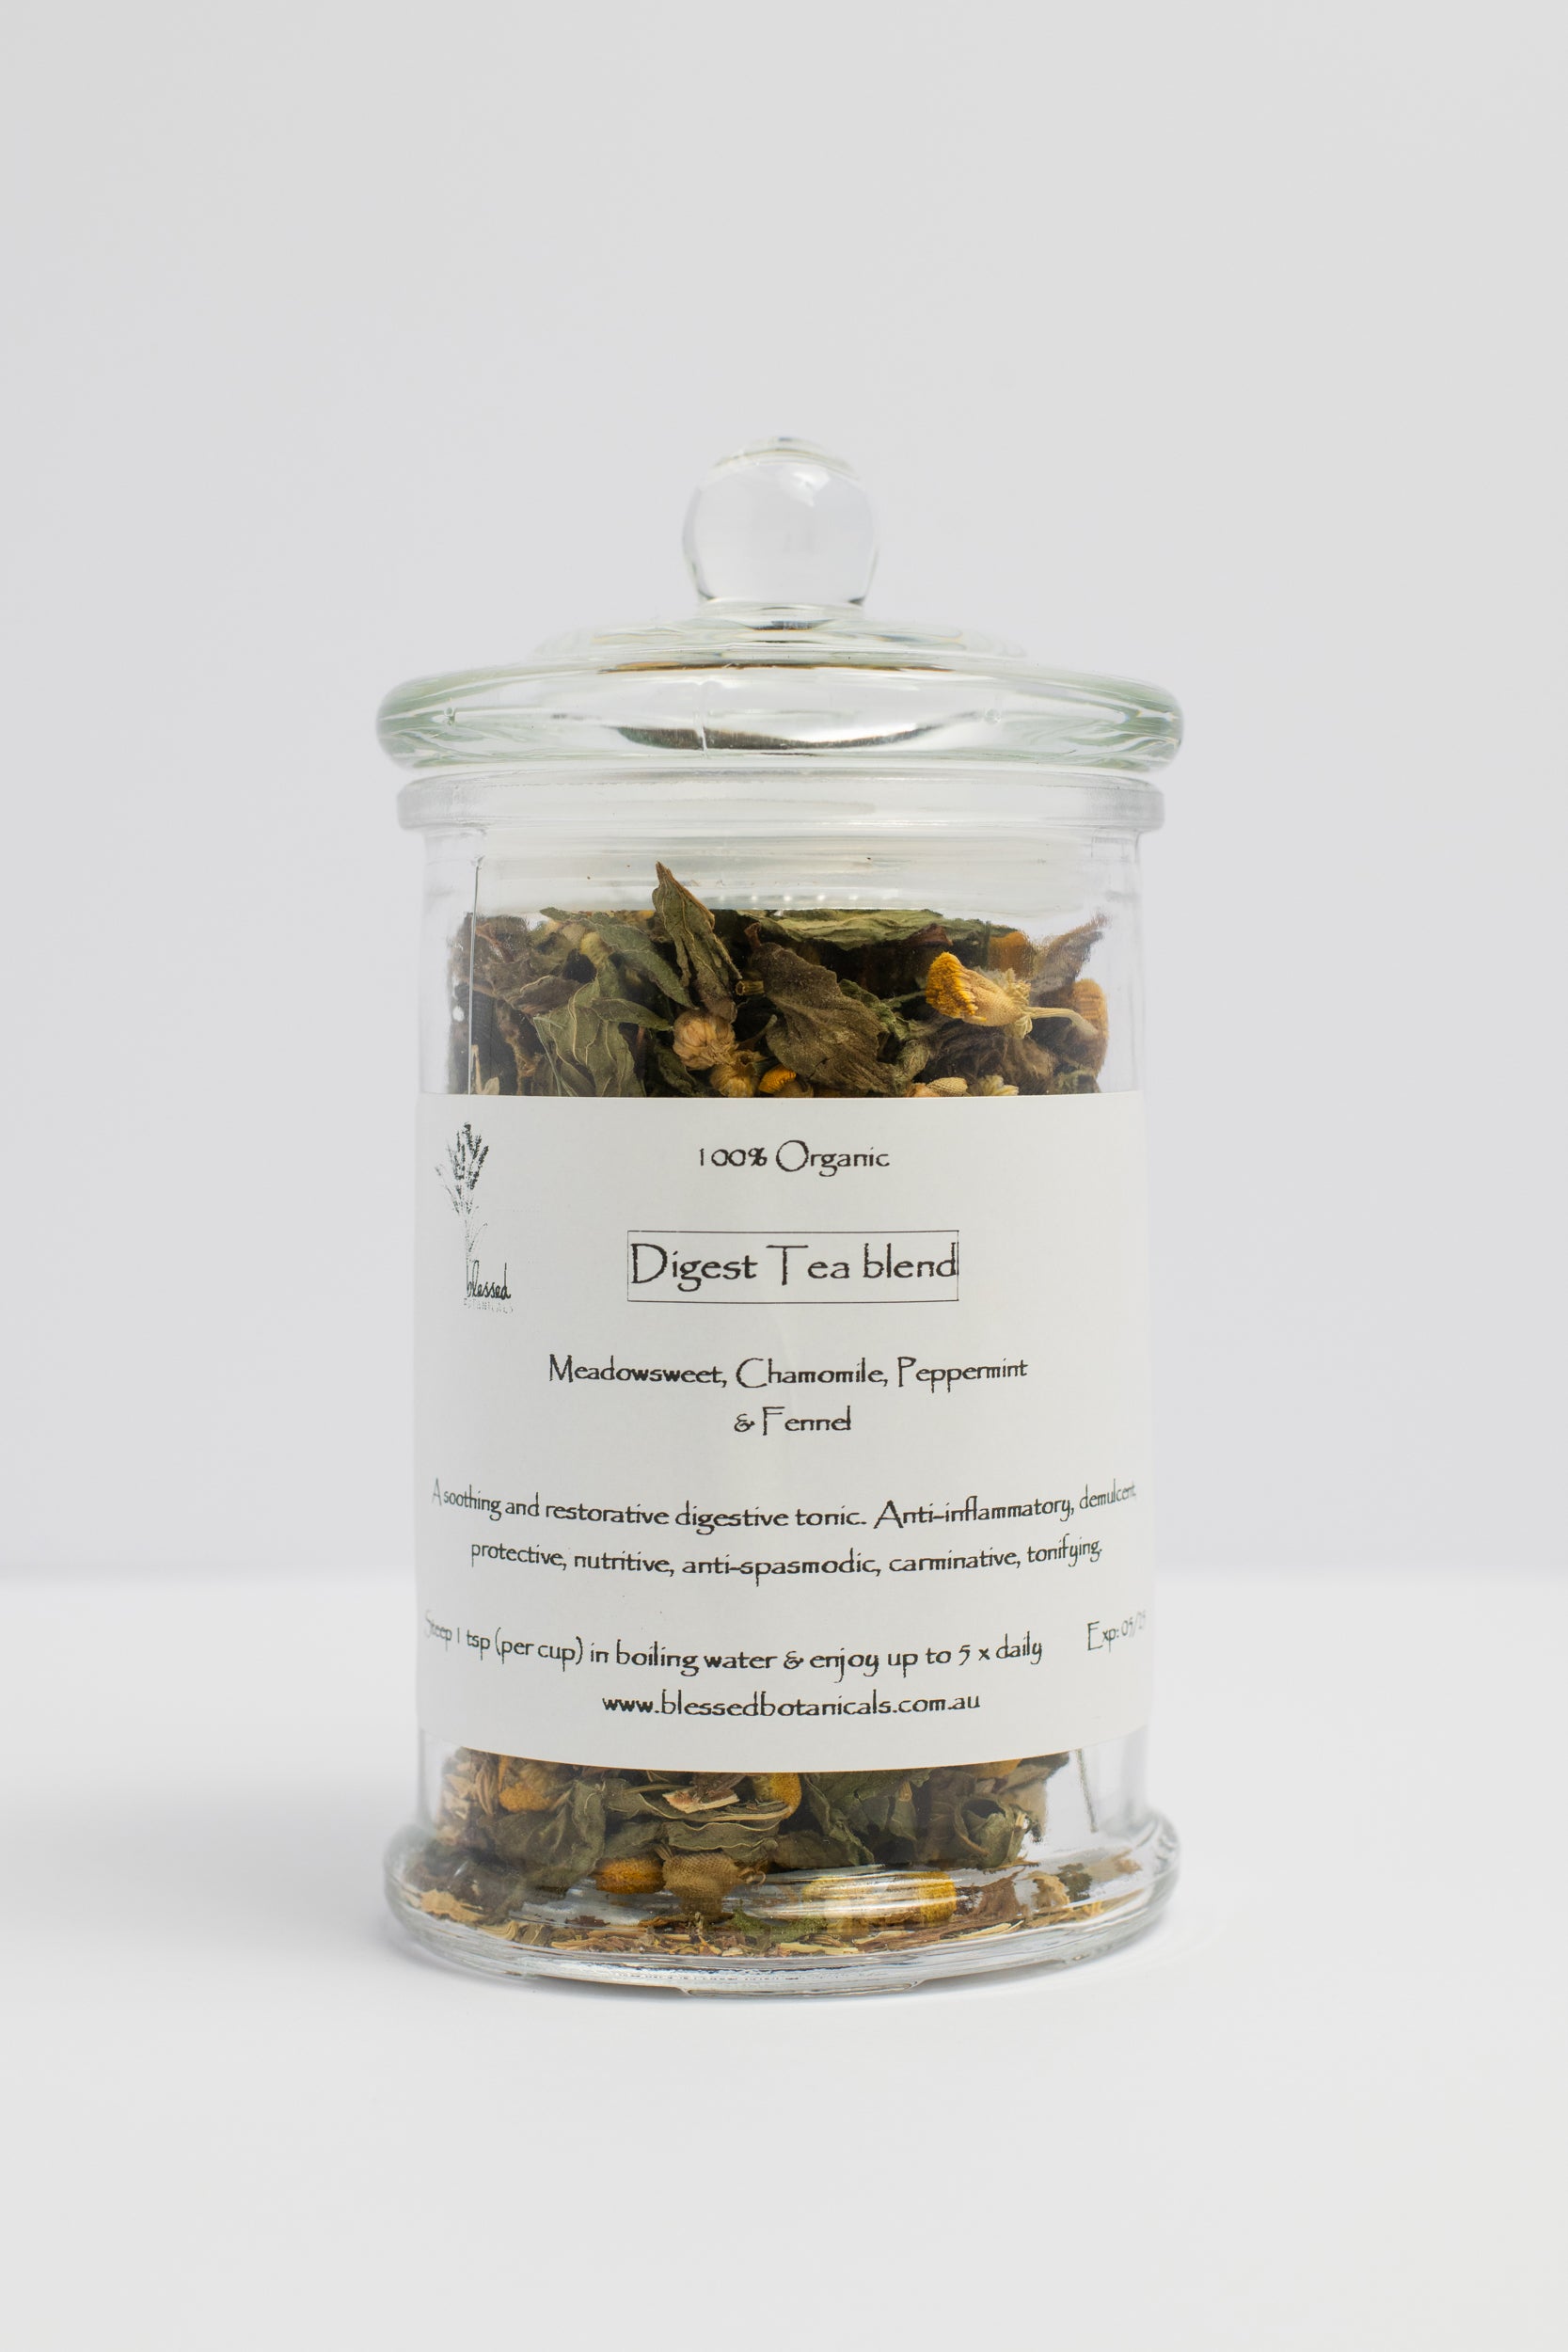 bespoke herbal tea, infusion, tissane, small batch, bespoke, artisan, dried herbs, herbal medicine, made to order, tailor made, organic, detoxification, digest, digestion, rest, relax, calm, sleep, sedative, insomnia, nervous system support. Chamomile, Fennel, Peppermint, Meadowsweet. Carminative, relieves gas and bloating, gastrointestinal health, after dinner. loose leaf tea.